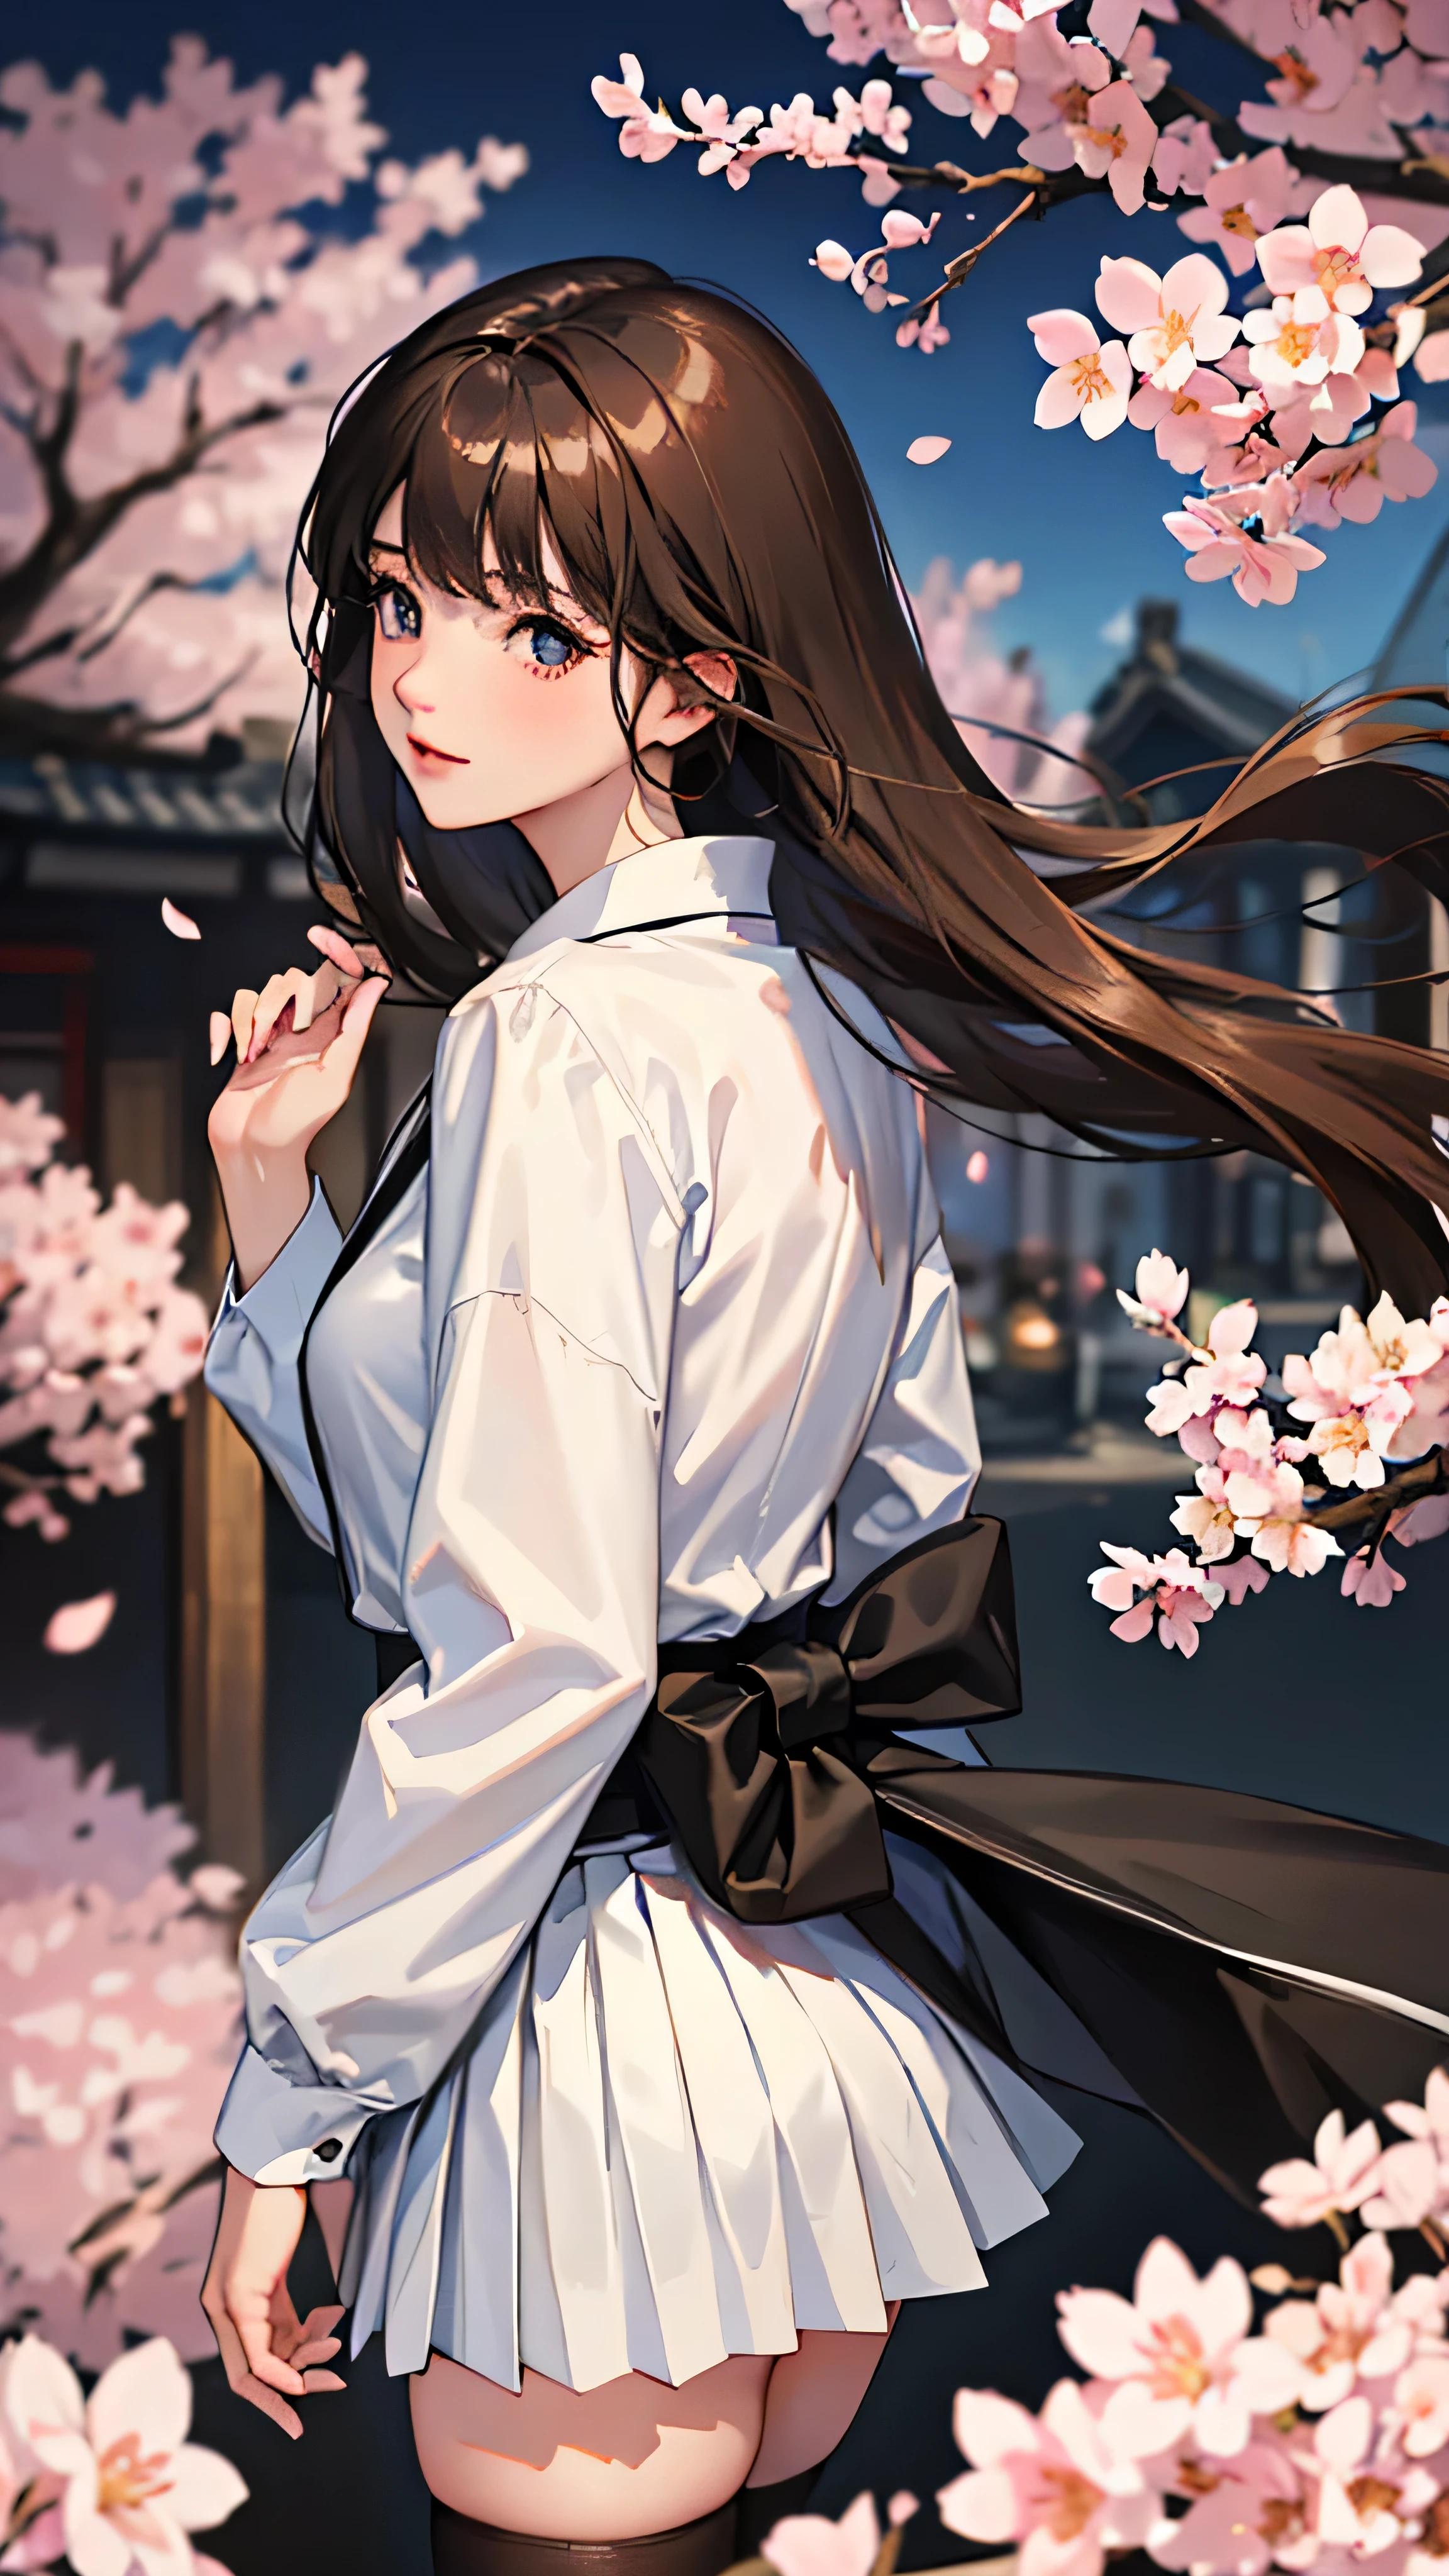 ((best quality)), ((masterpiece)), (detailed), (natural side lighting, movie lighting), 
((carry the audience on their backs)), whole body, 1 girl, Rear view, ((Japanese)), perfect body structure, shiny skin, Long hair fluttering in the wind,
long black hair, Slender legs, beautiful hands, 
((symmetrical clothes, white collar shirt, Black pleated mini skirt，dark stockings)) , 
(Beautiful scenery), depth of field, japanese city, street, spring, Cherry blossoms,